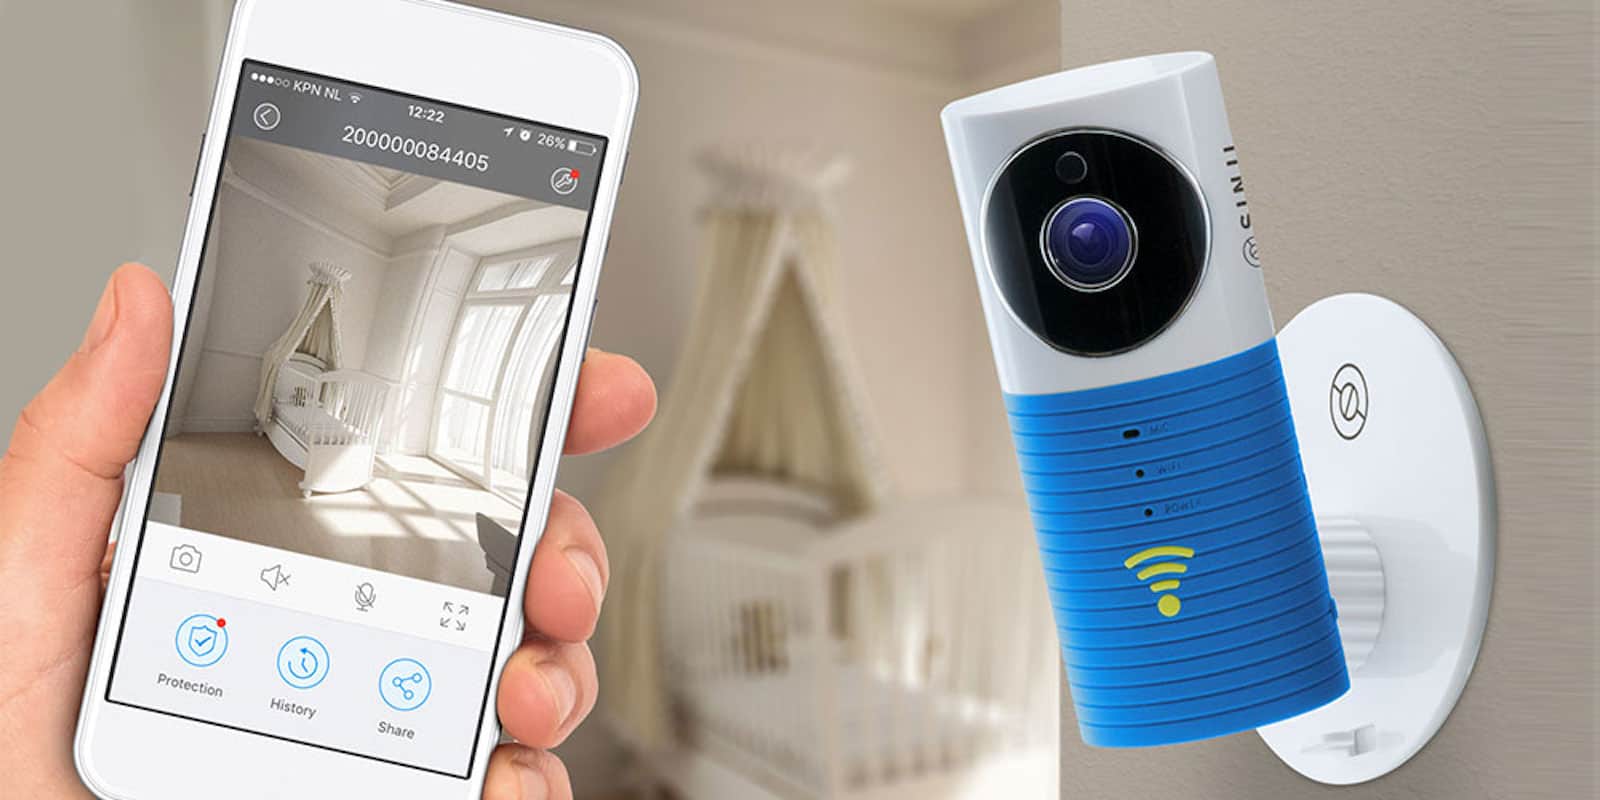 This WiFi camera is ideal for home security, keeping an eye on your baby, or just answering the door.